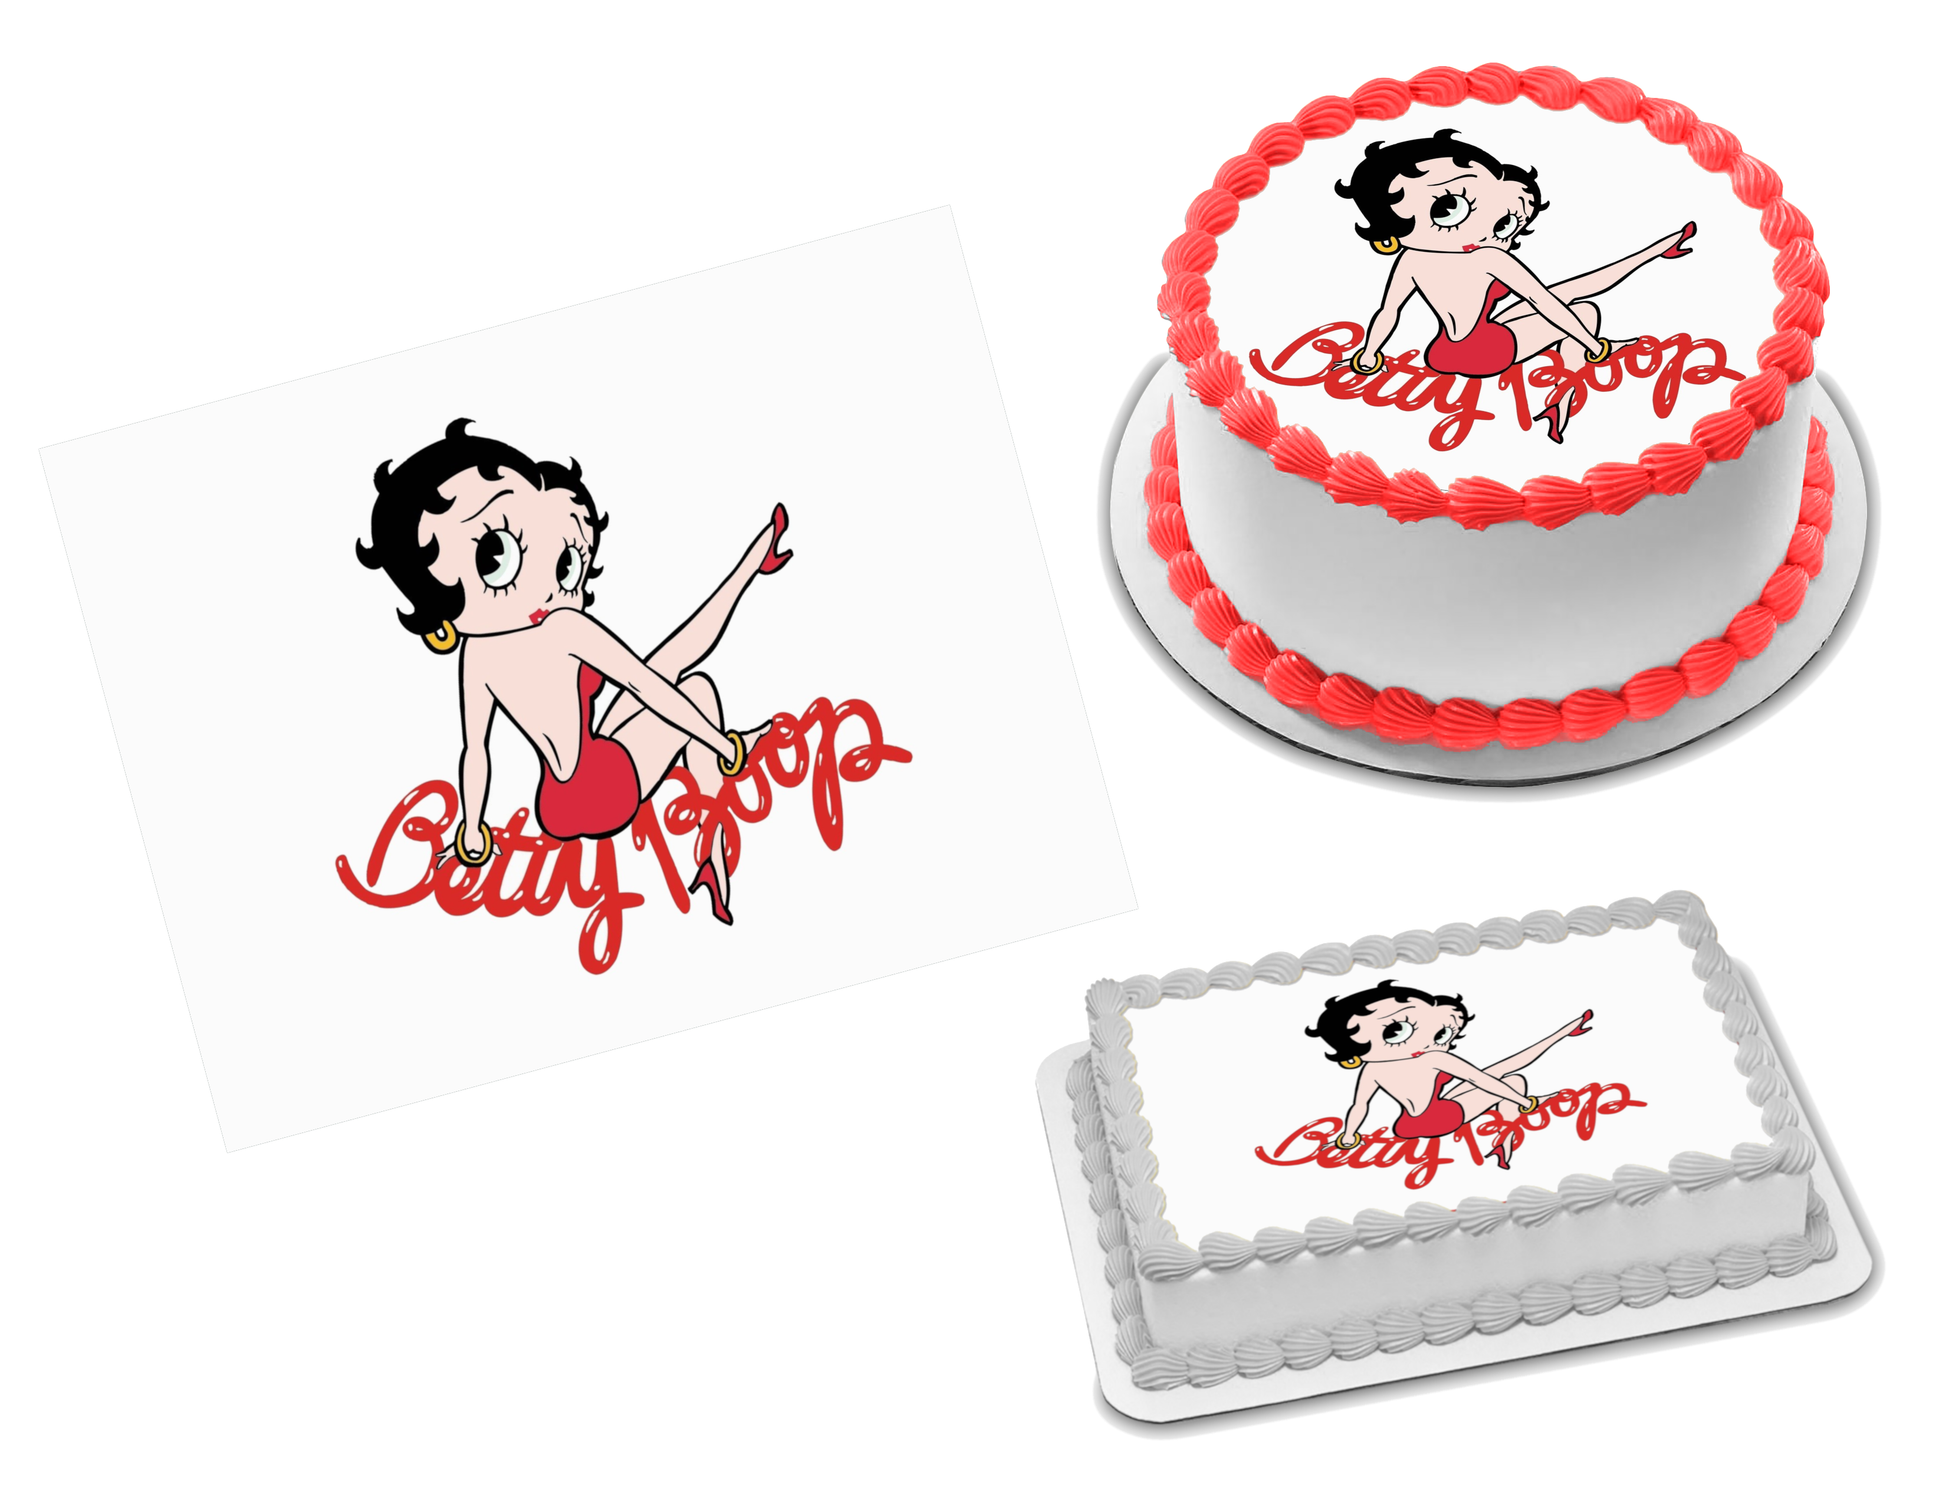 Supreme Edible Cupcake Toppers (12 Images) Cake Image Icing Sugar Shee -  PartyCreationz